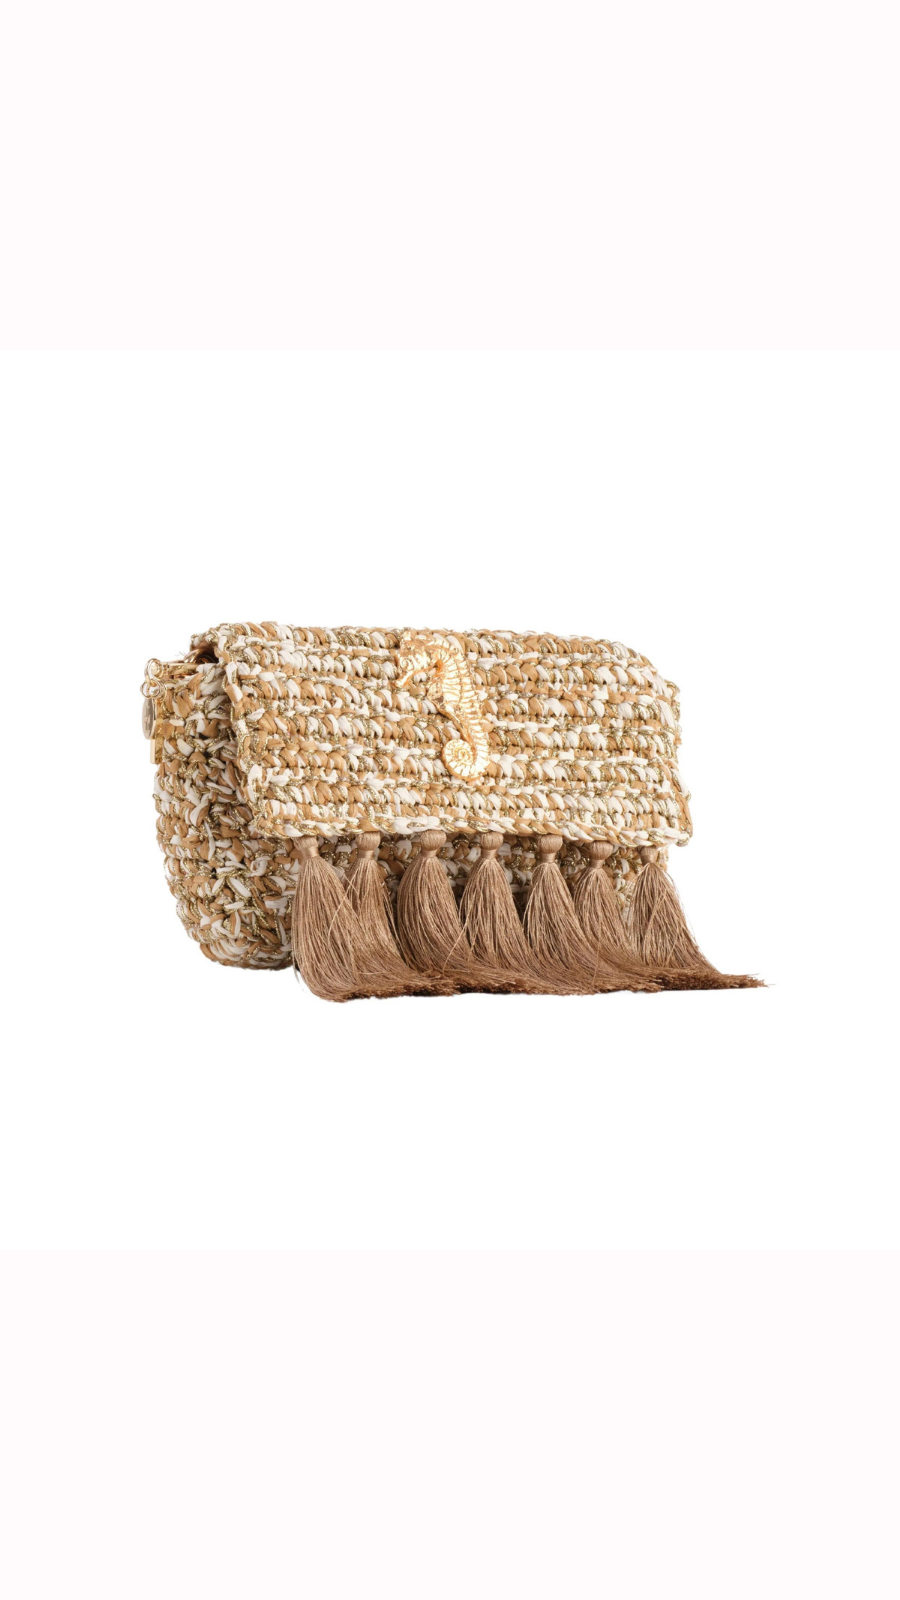 Thumbnail preview #4 for 4 Weave Real Raffia Clutch